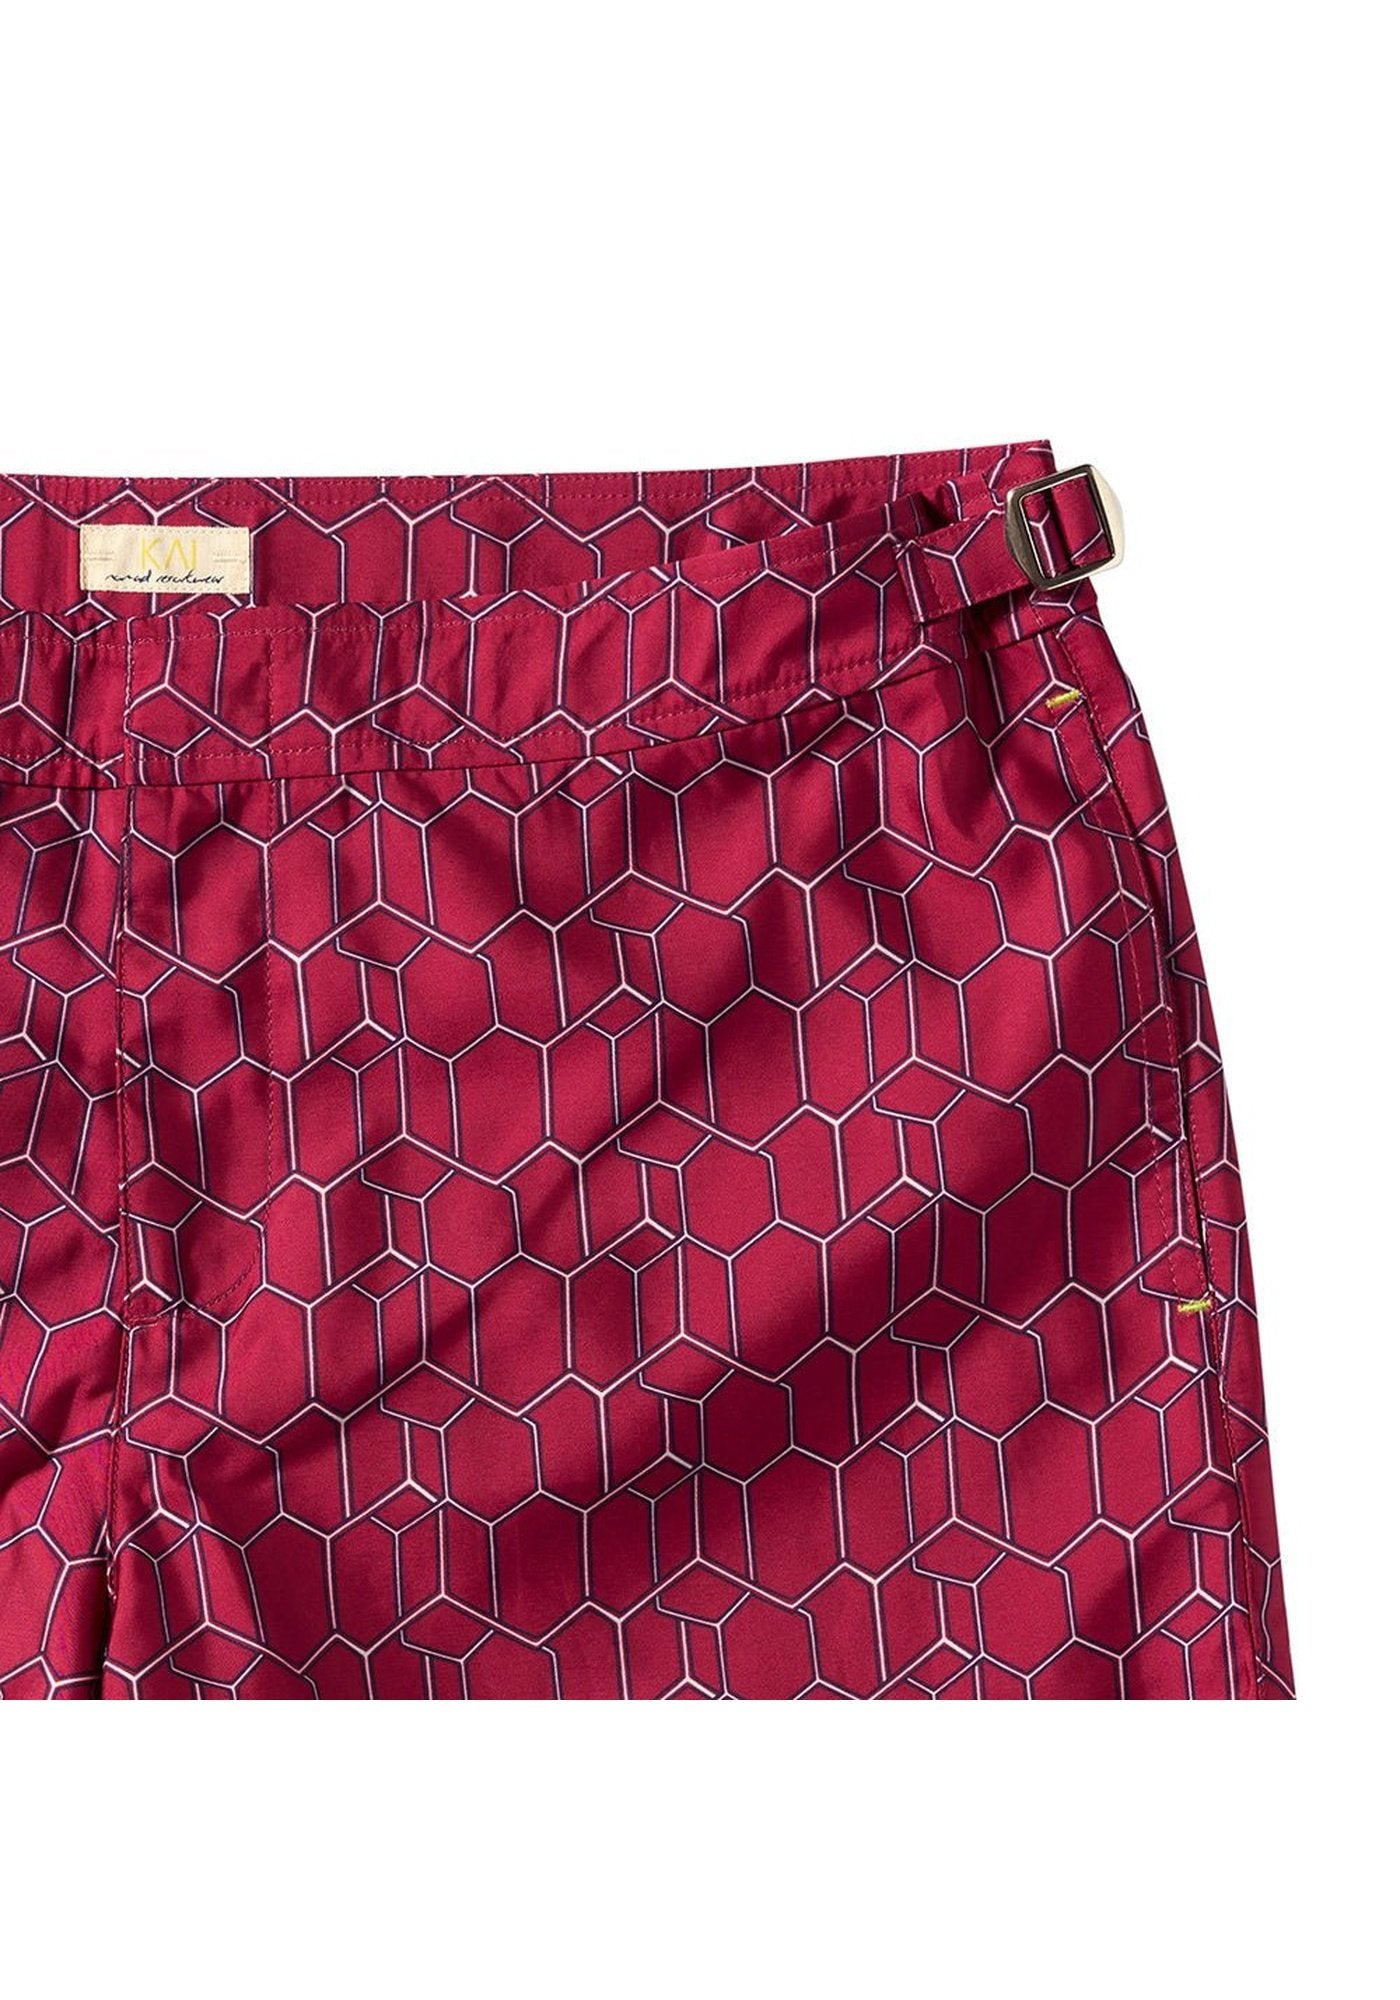 Swim Shorts Buckles Bee - Traces of Me